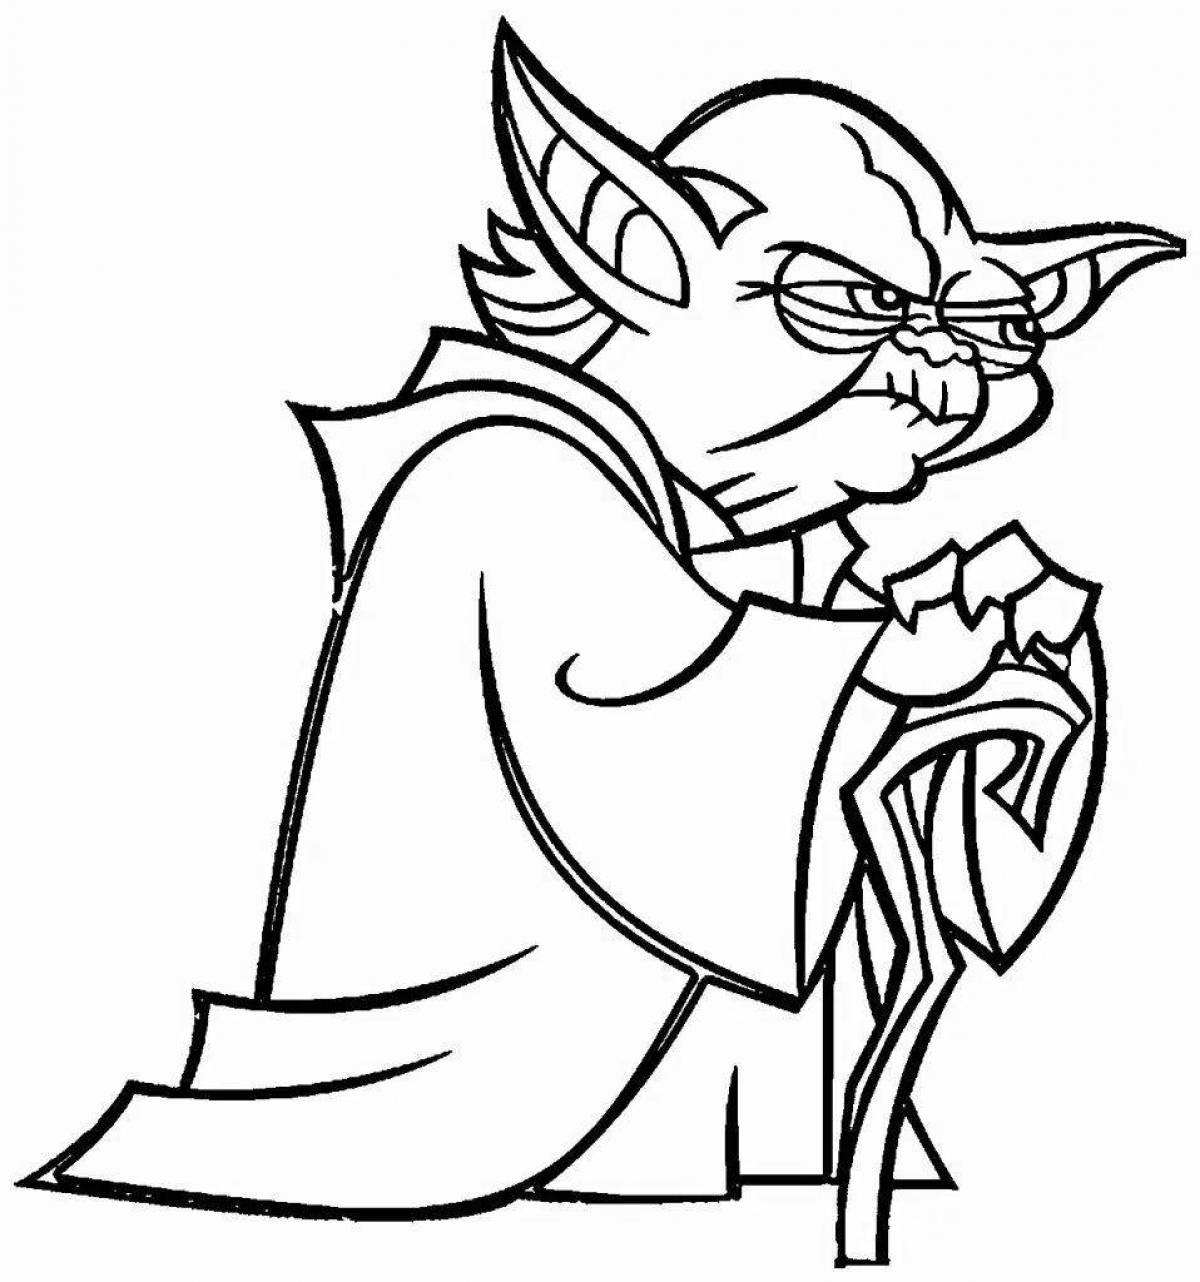 Colorfully colored yoda coloring page